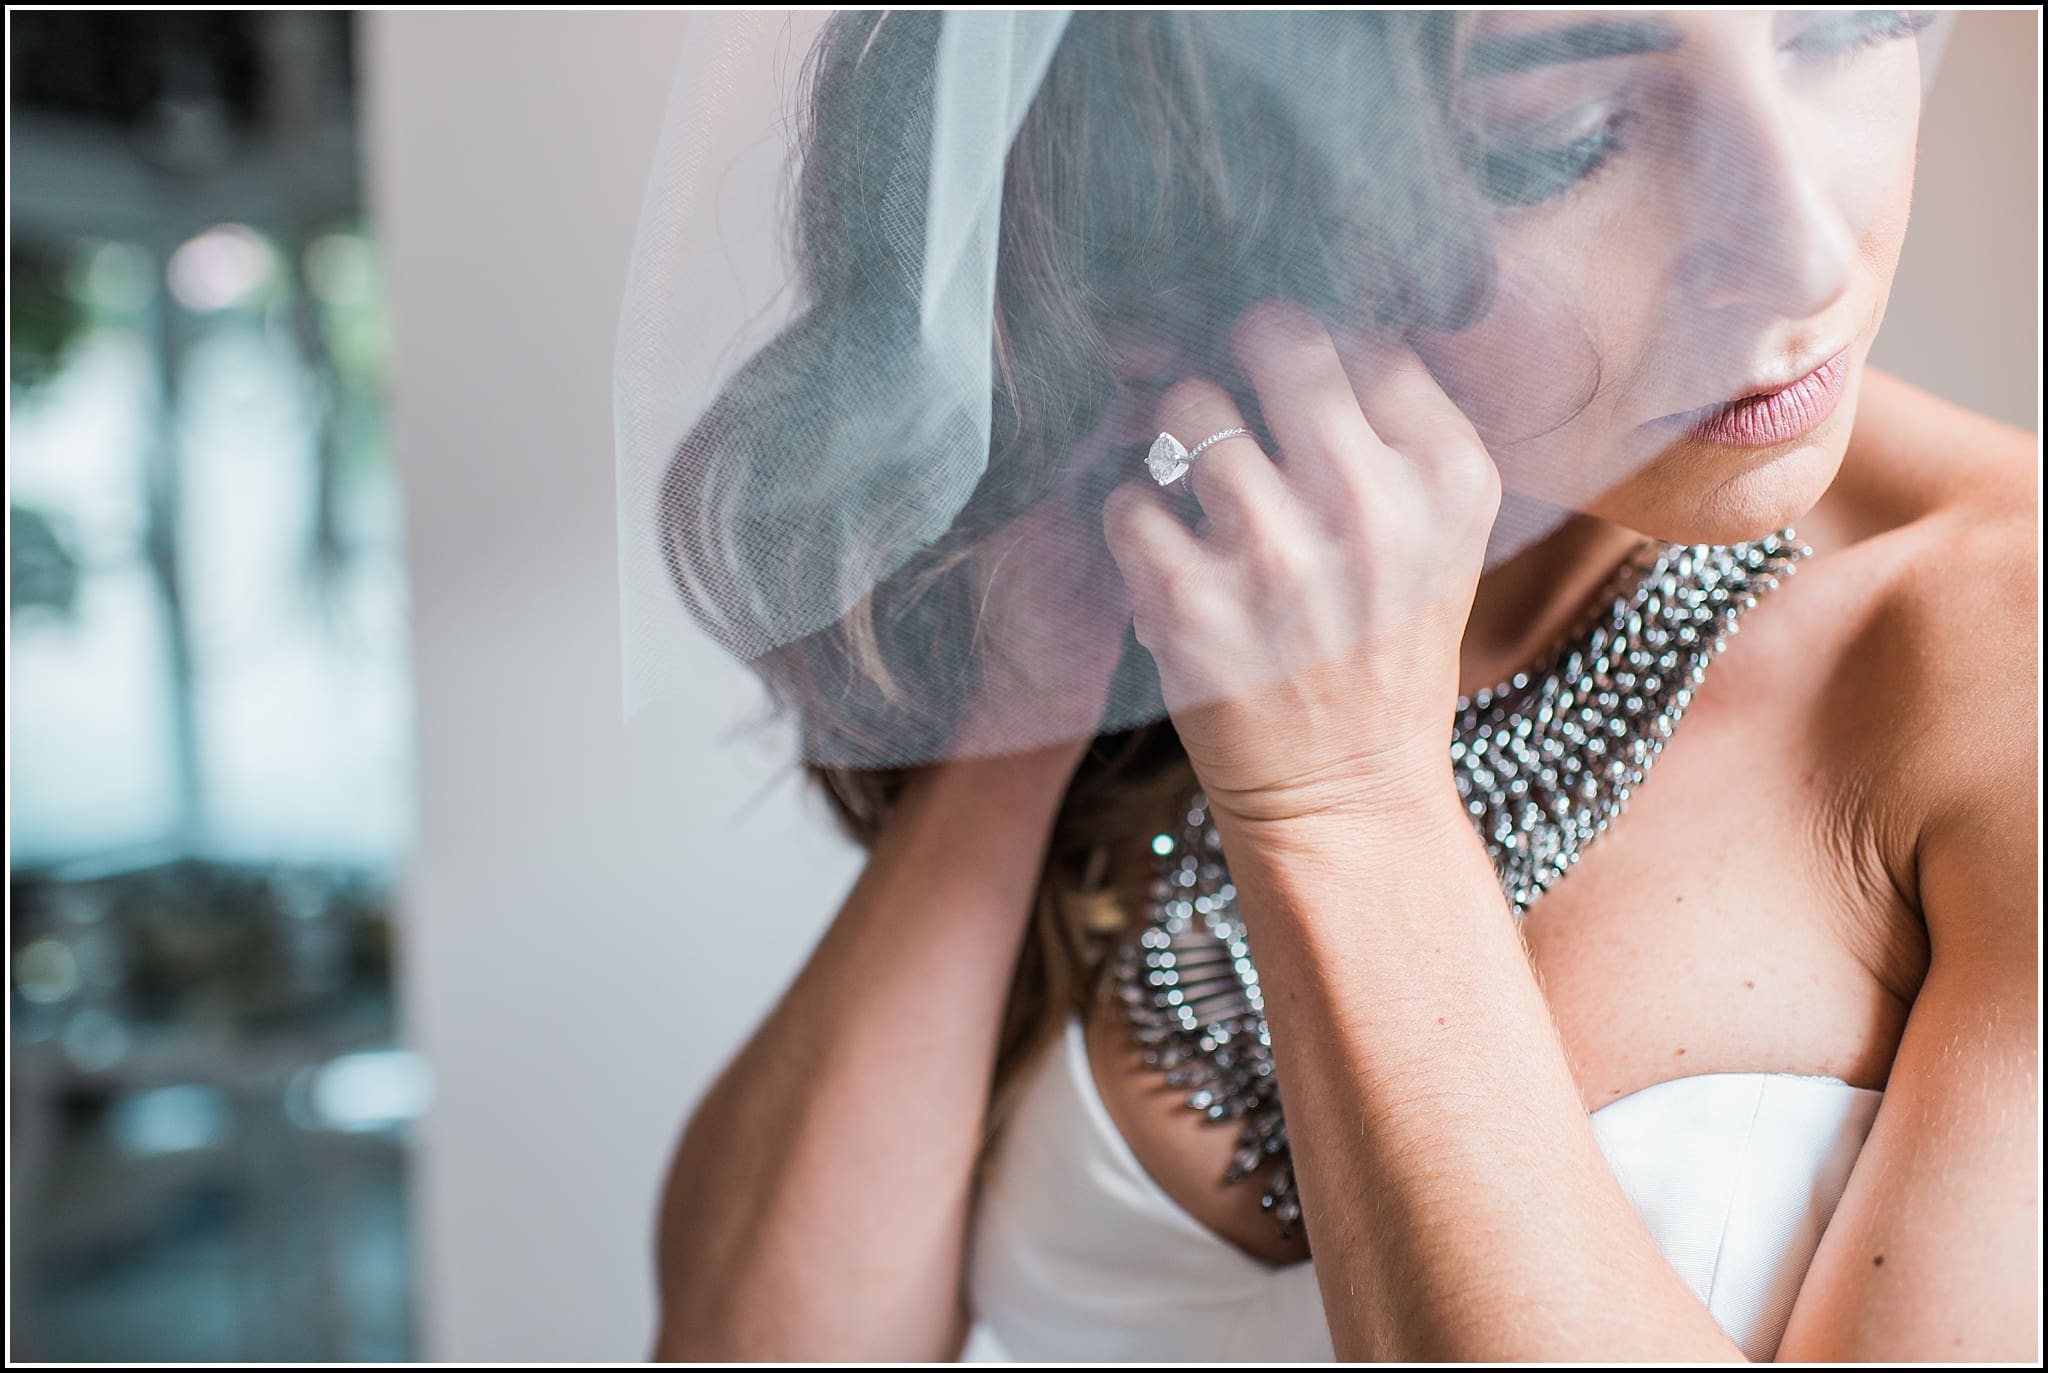  favorite wedding images 2016, wedding photos from 2016, our favorite wedding photos, bridal portrait getting ready